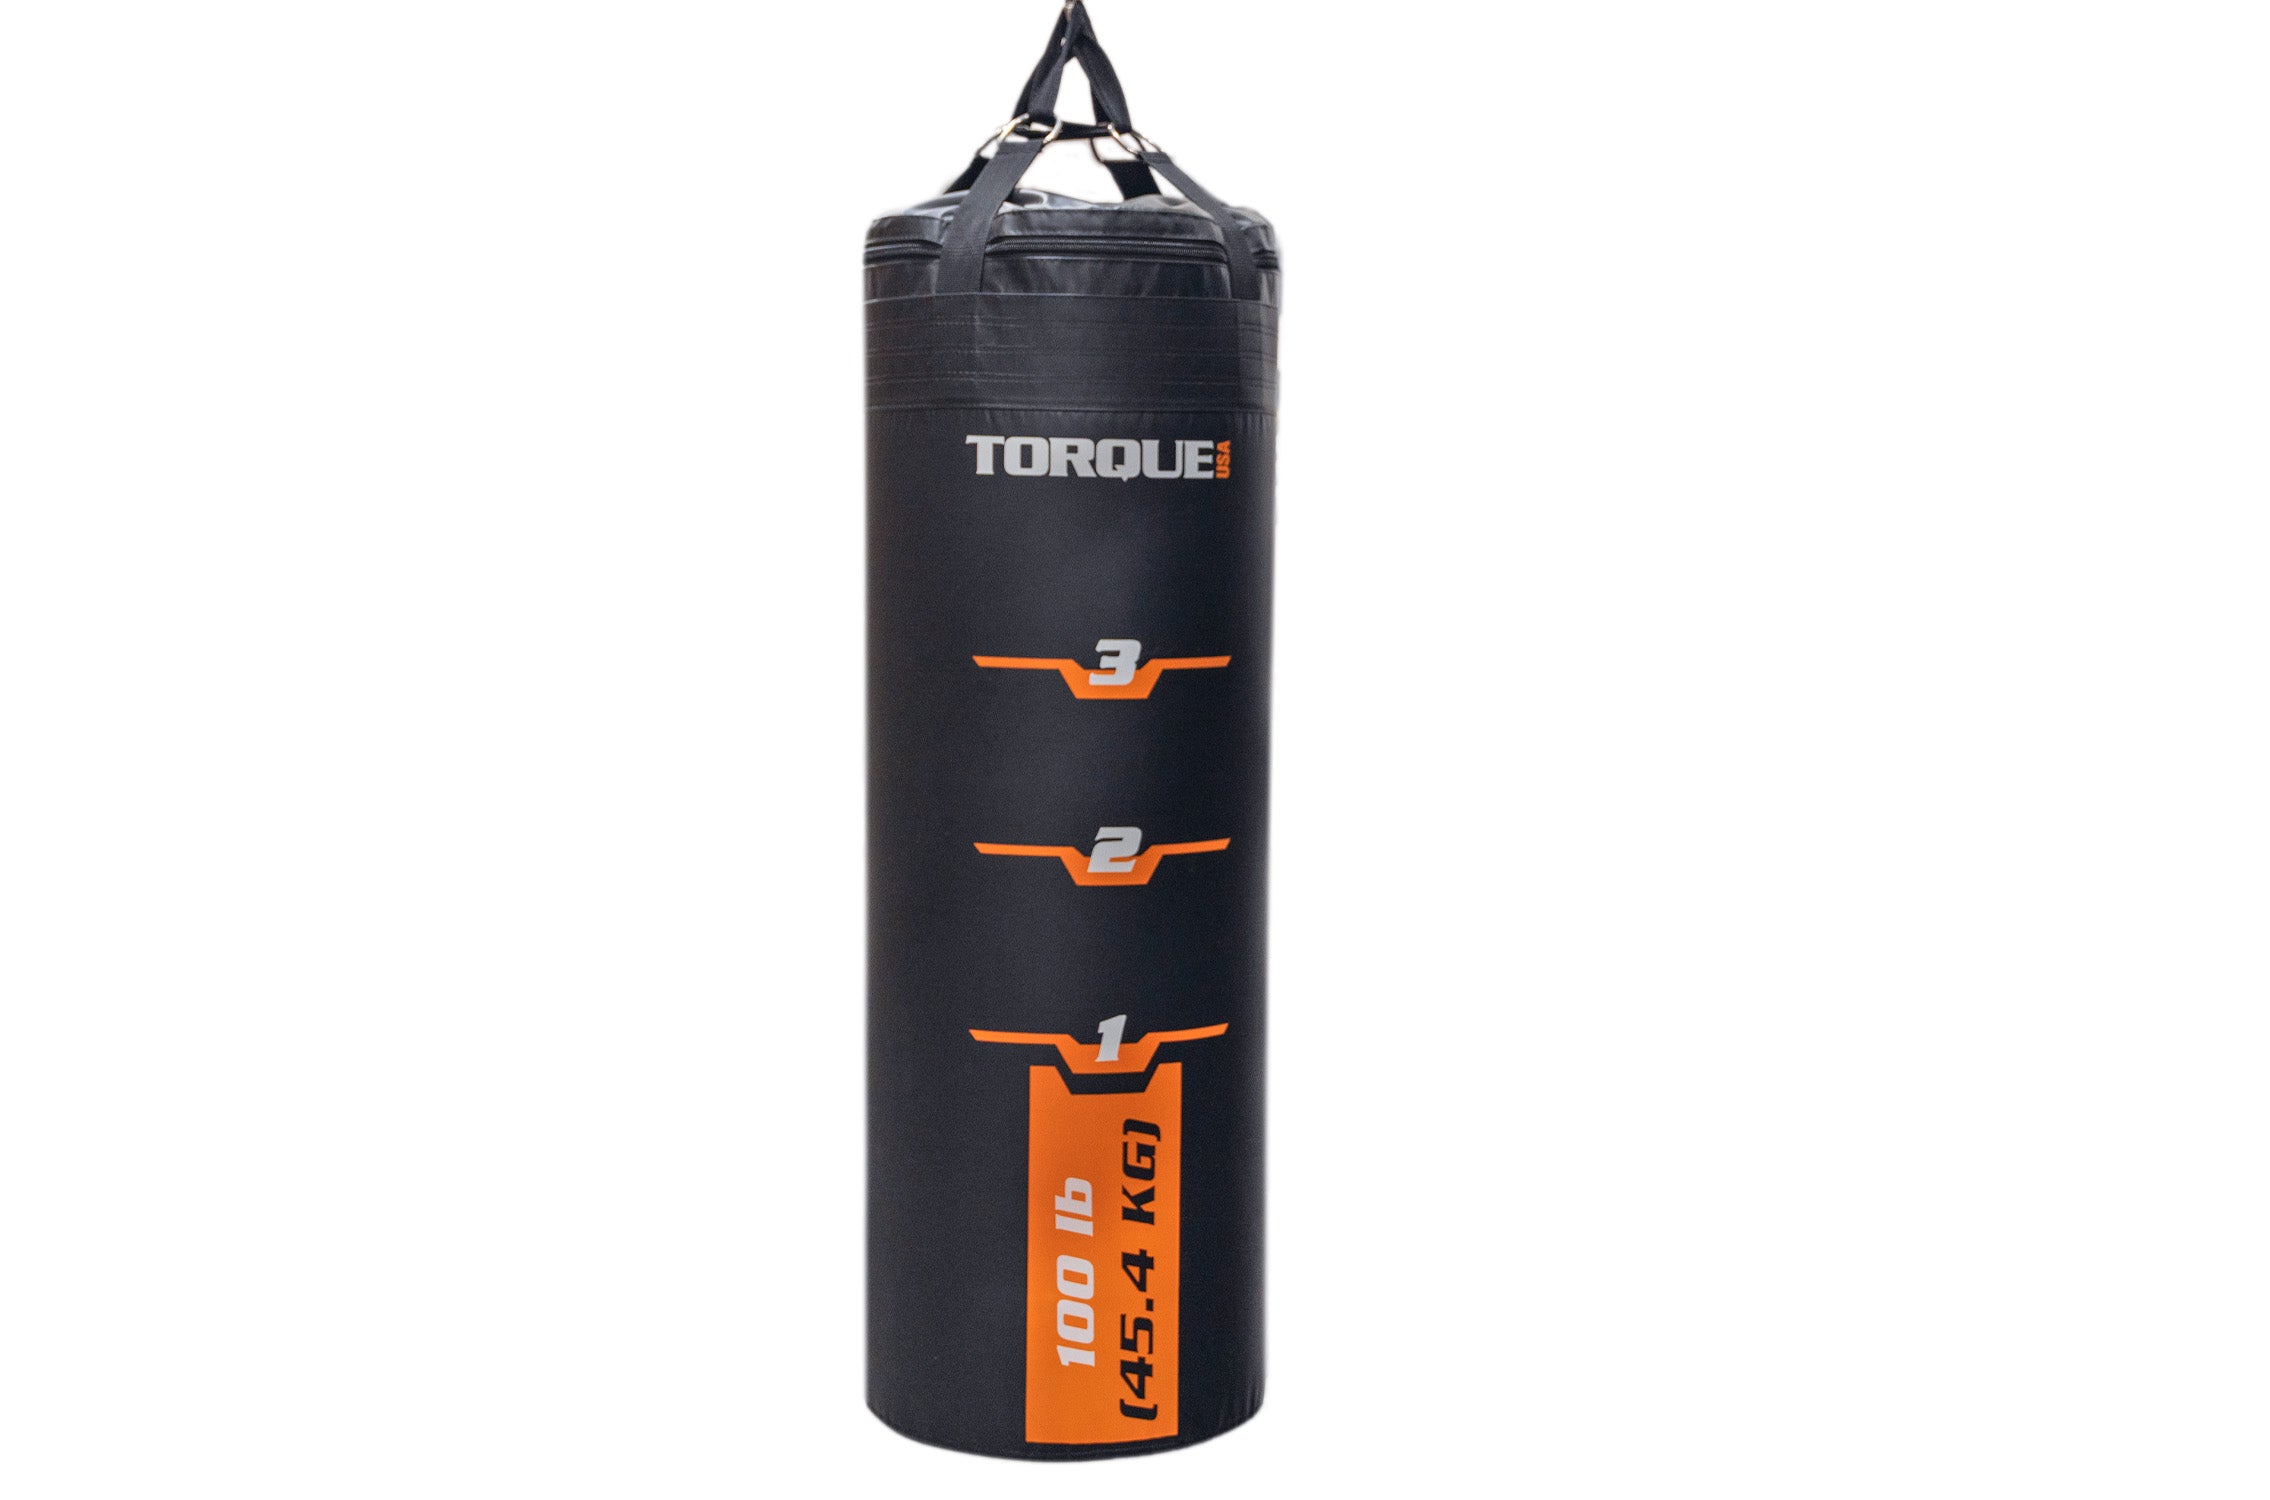 Best Punching Bags in India